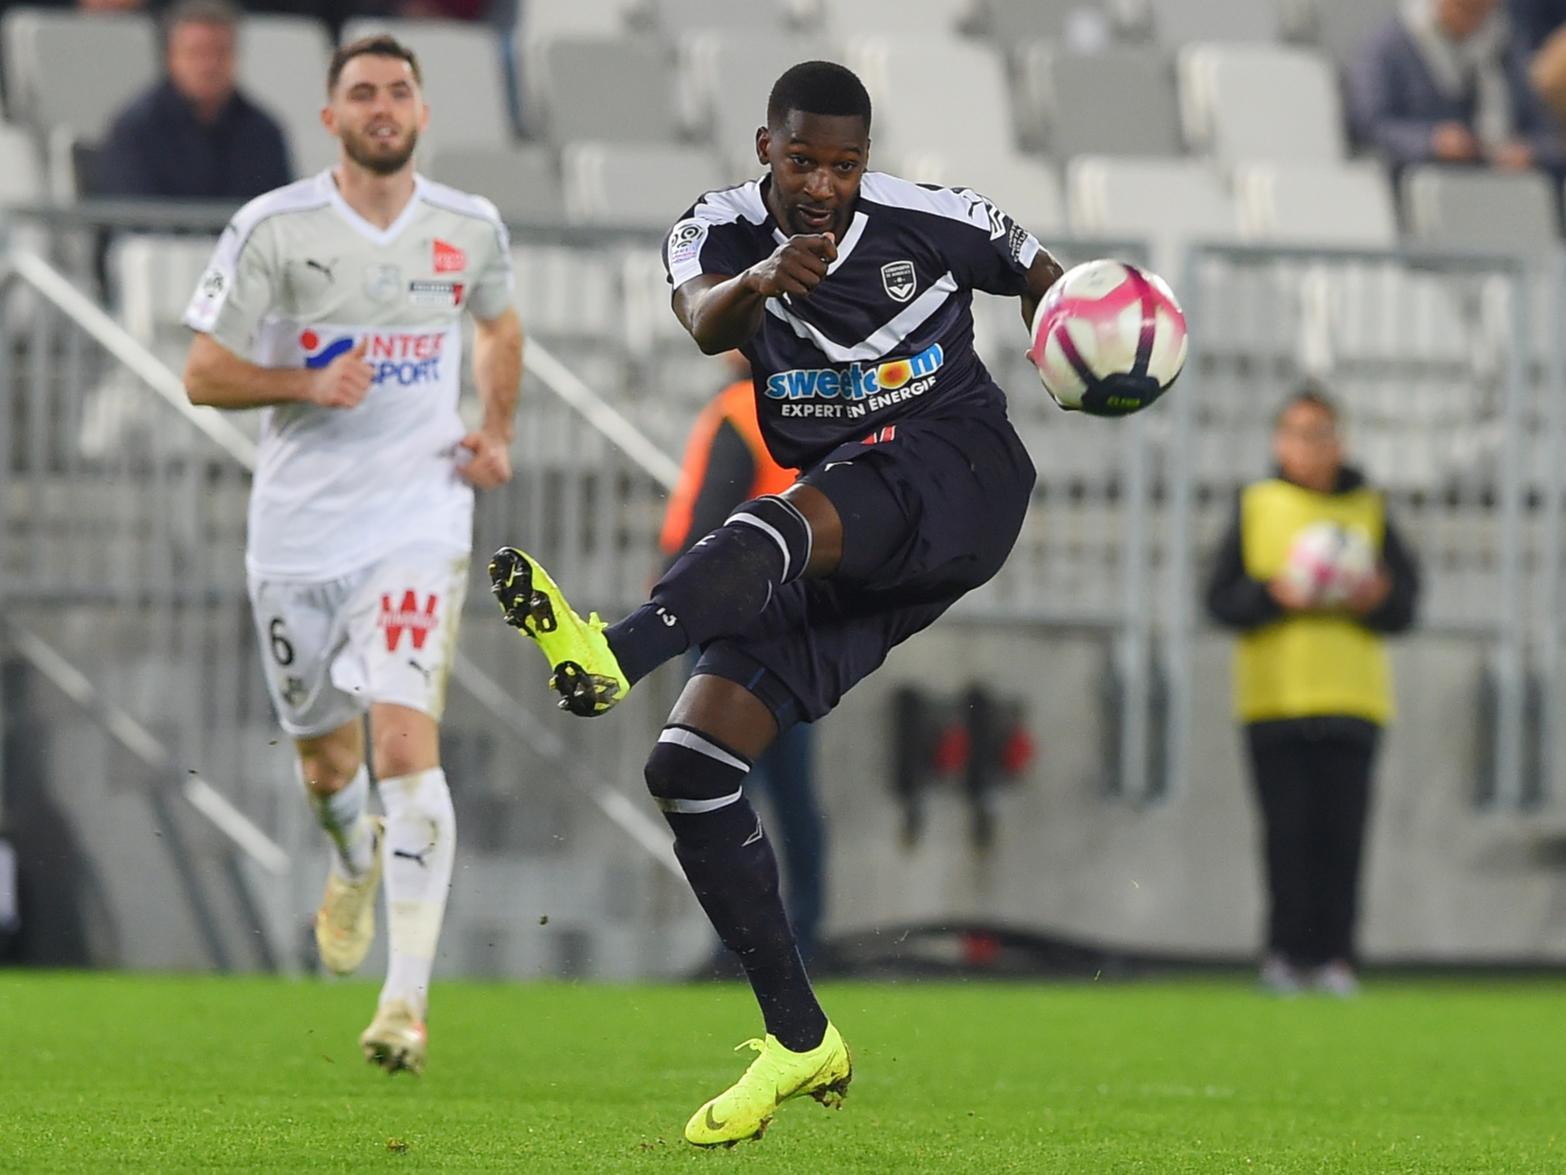 Cardiff City have been handed a major boost in their pursuit of midfielder Younousse Sankhare, who is now a free agent after leaving Bordeaux following a dispute with the club. (L'Equipe)